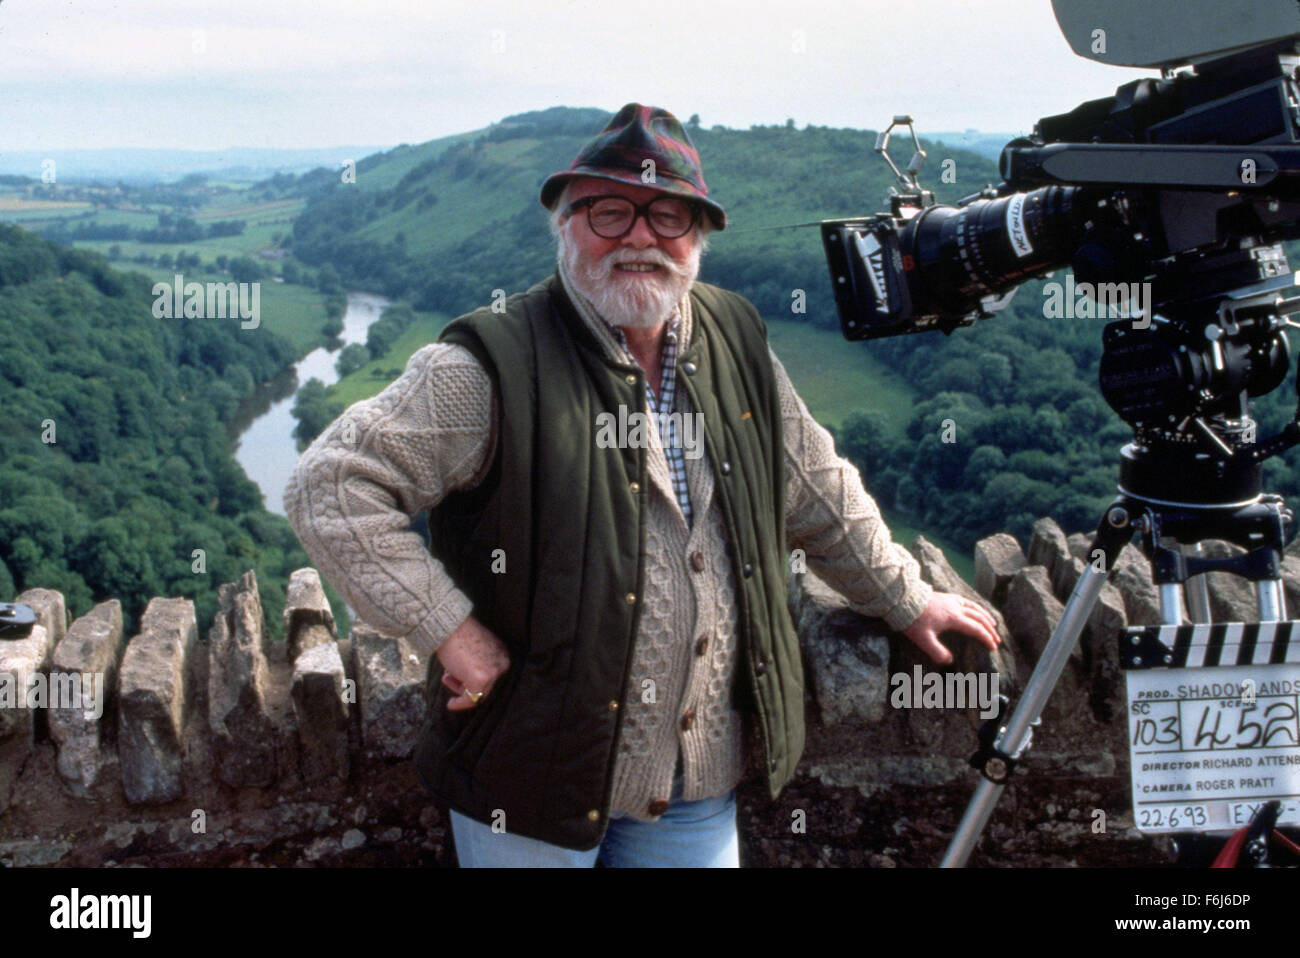 RICHARD ATTENBOROUGH (Aug. 29, 1923 - Aug. 24, 2014) was an English actor, film director, producer and entrepreneur. He was the President of the Royal Academy of Dramatic Art (RADA). He won two Academy Awards as a film director and producer for 'Gandhi' in 1983. He has also won four BAFTA Awards and four Golden Globe Awards. PICTURED: Jun 1, 1993 - United Kingdom - Director RICHARD ATTENBOROUGH on location during filming of his movoe 'Shadowlands.' (Credit Image: c SNAP/Entertainment Pictures) Stock Photo